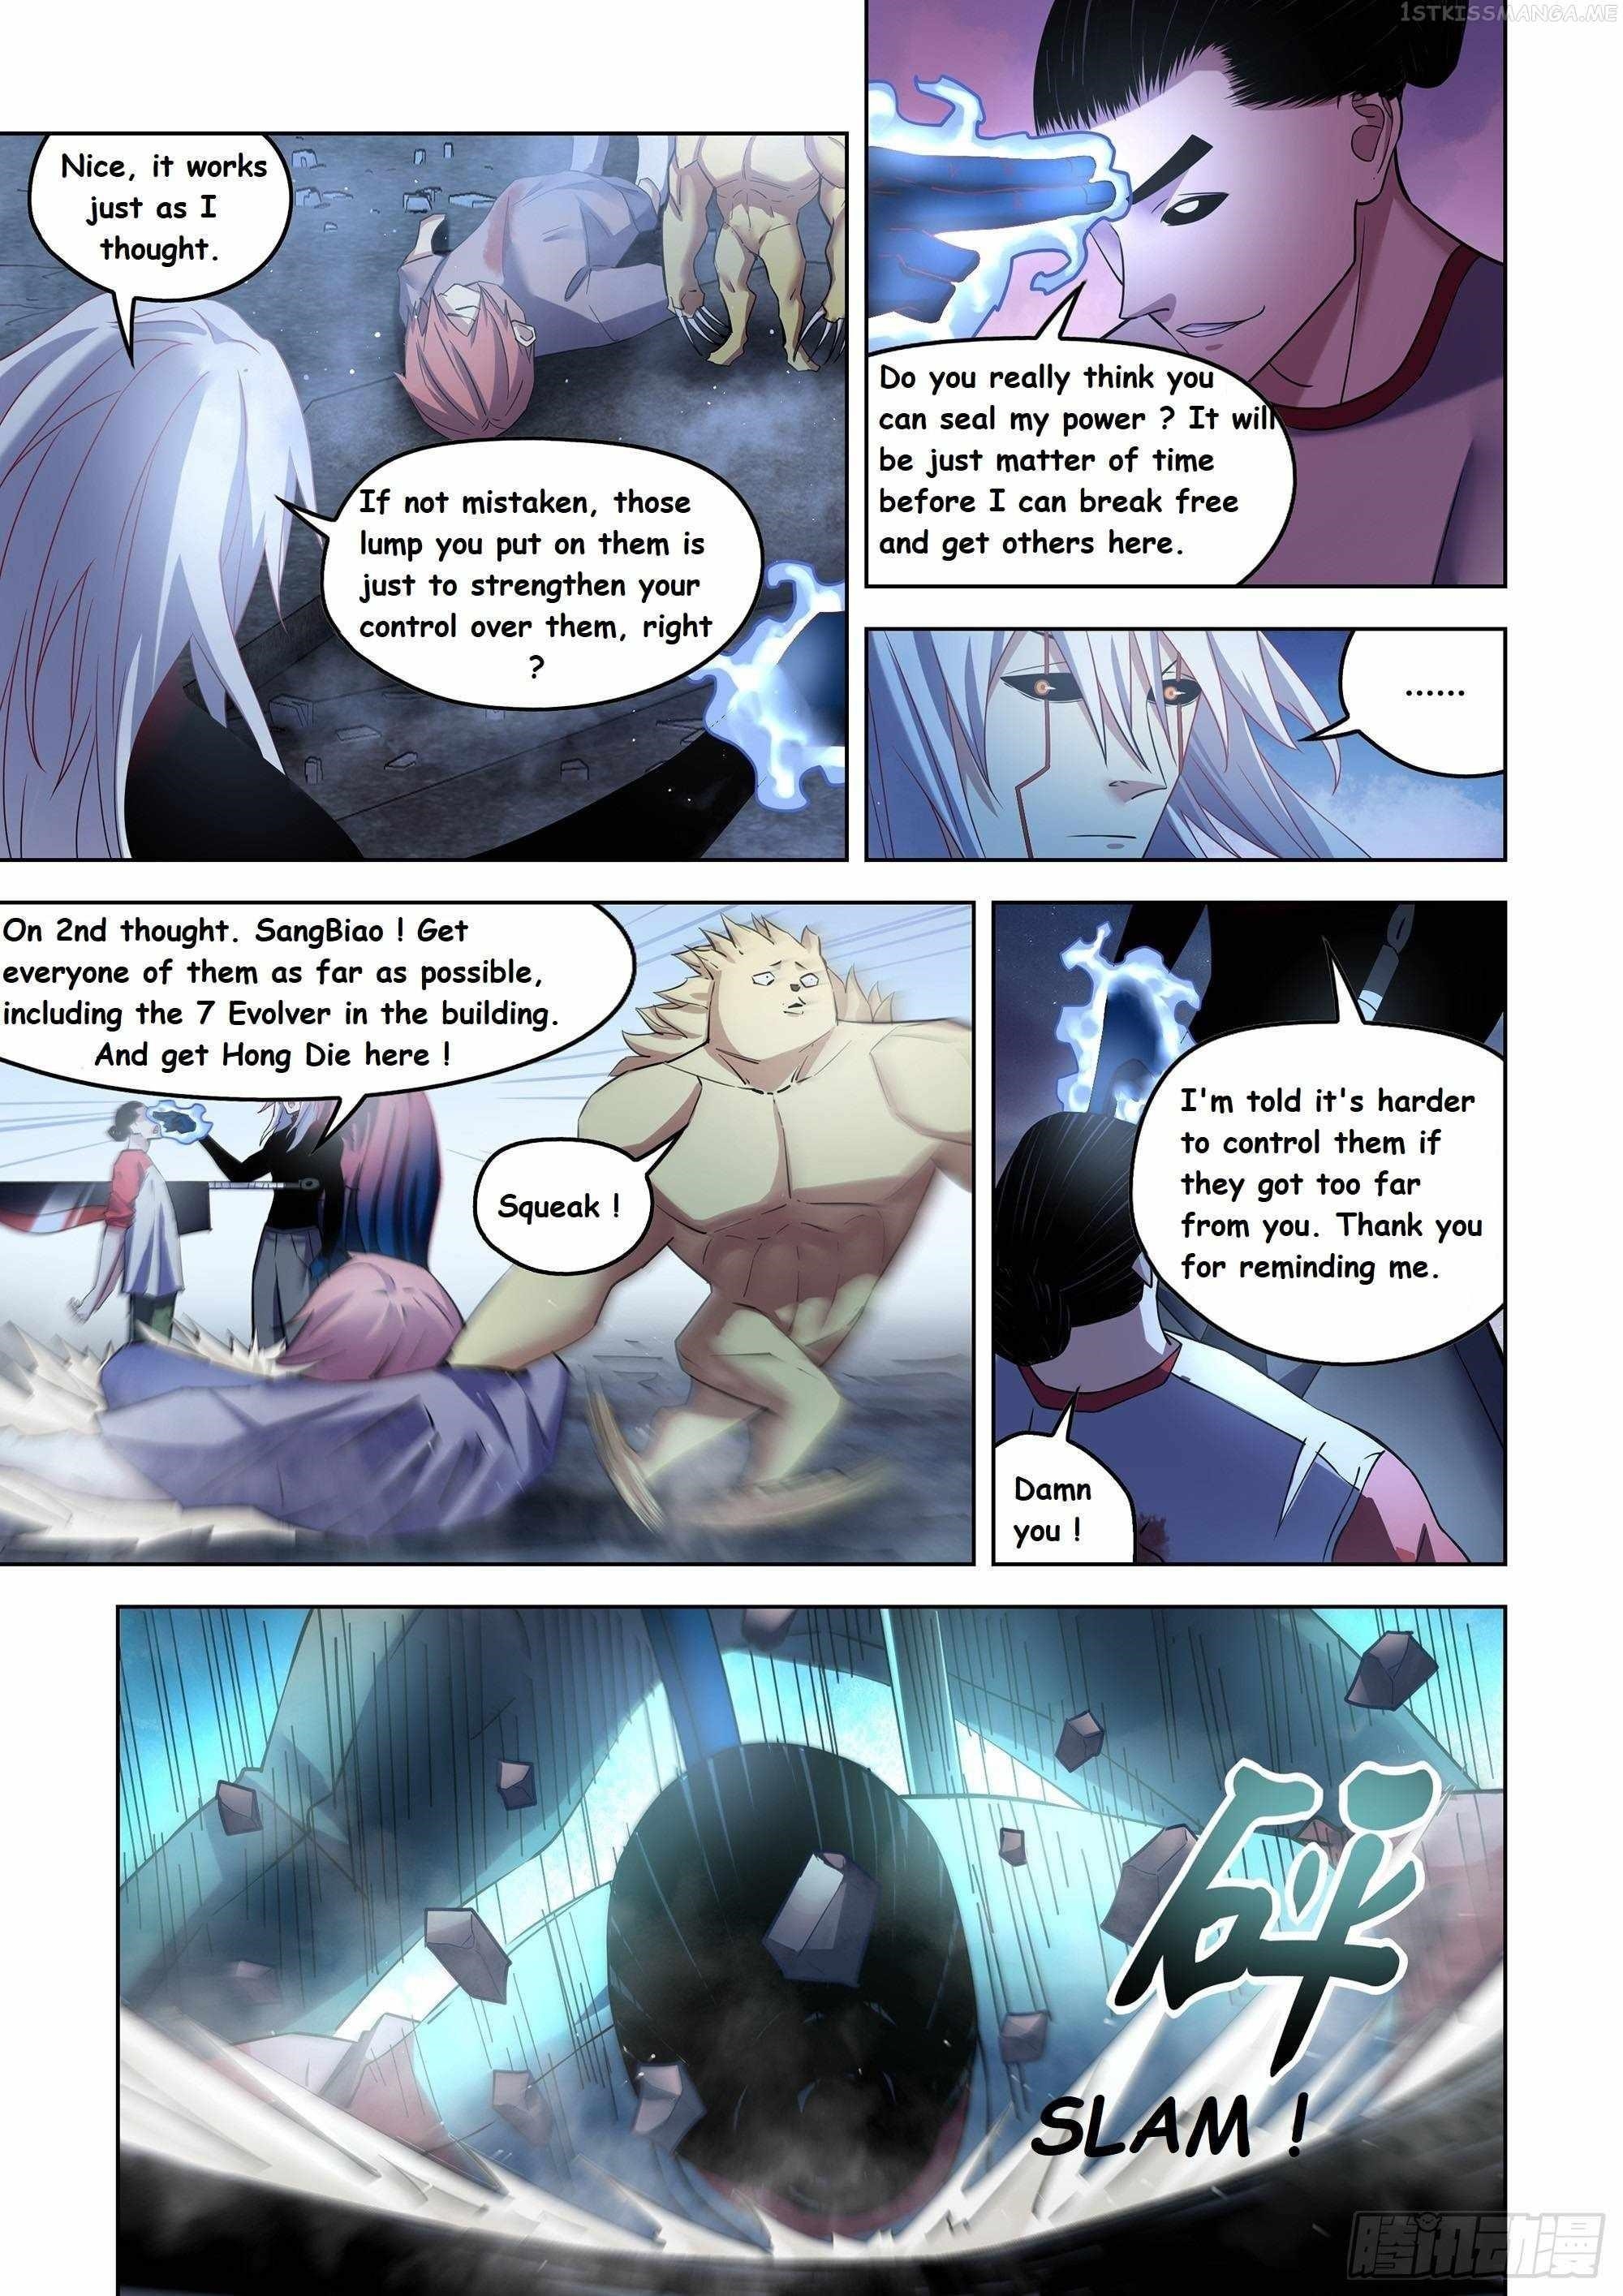 The Last Human chapter 520 page 7